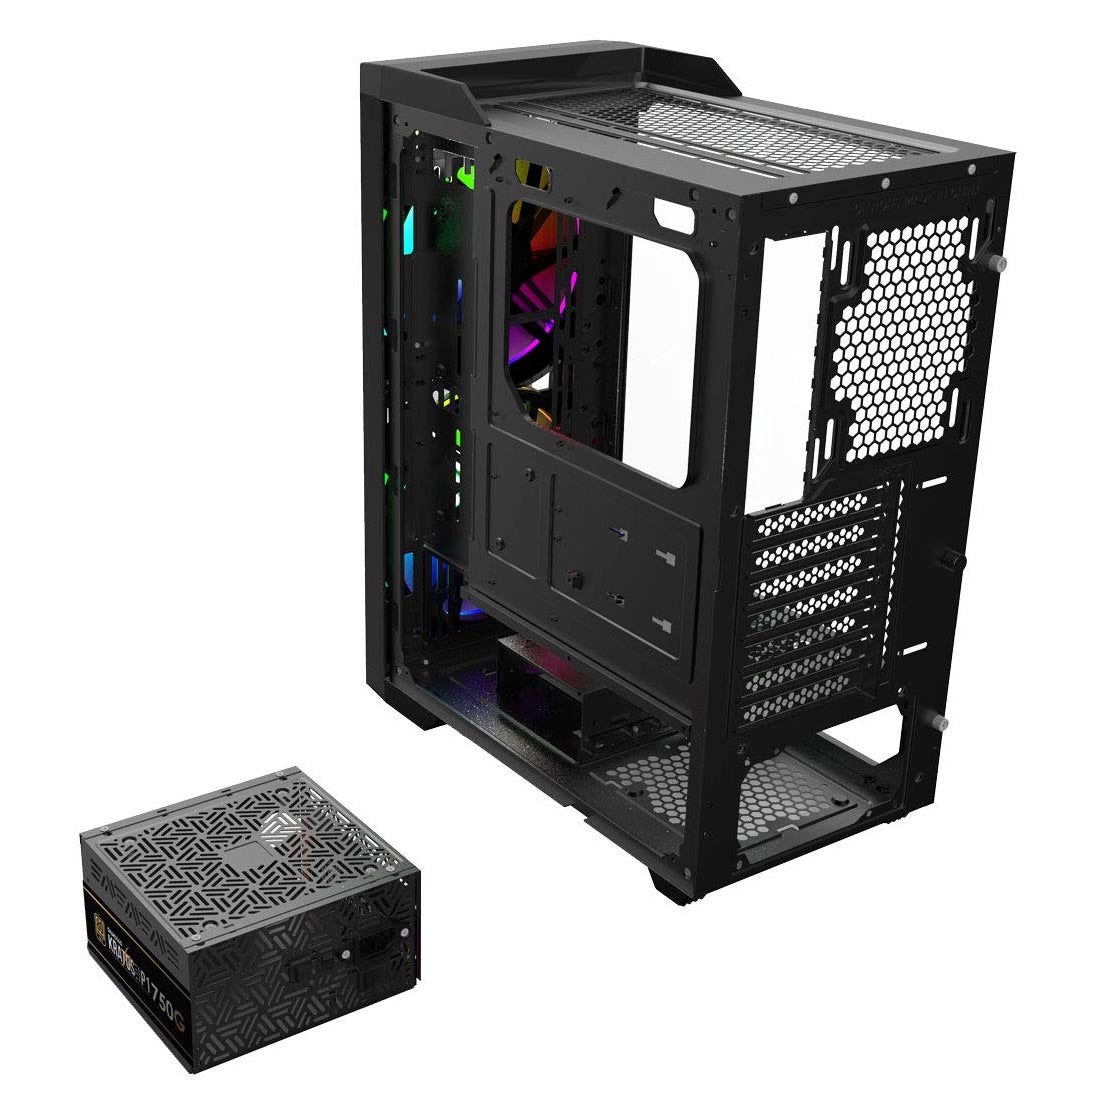 Gamdias APOLLO M1 Mid Tower PC Case Cabinet with Dual 200mm ARGB Pre-Installed Fans and Dust Filter